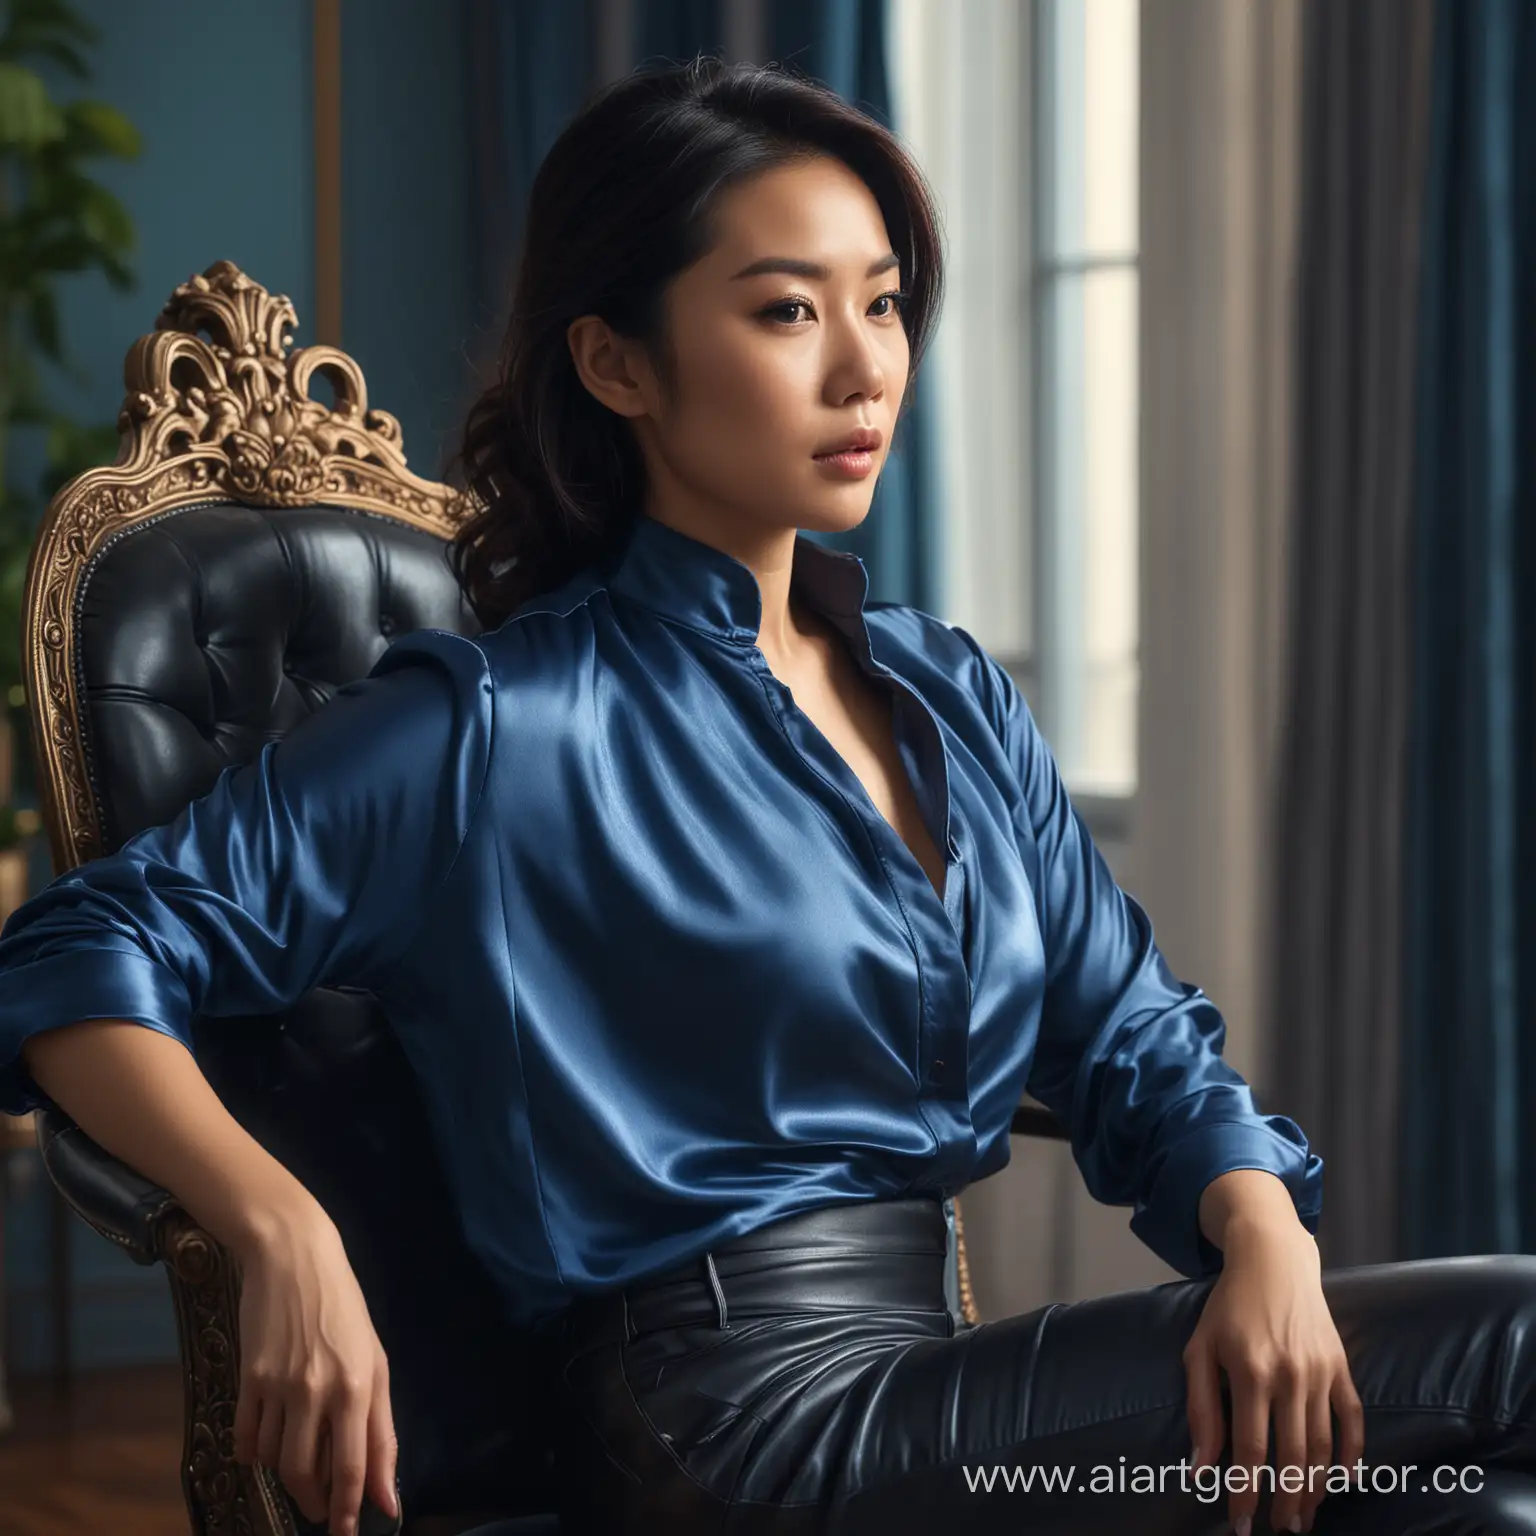 Elegant-Asian-Woman-in-Blue-Satin-Blouse-on-Ornate-Chair